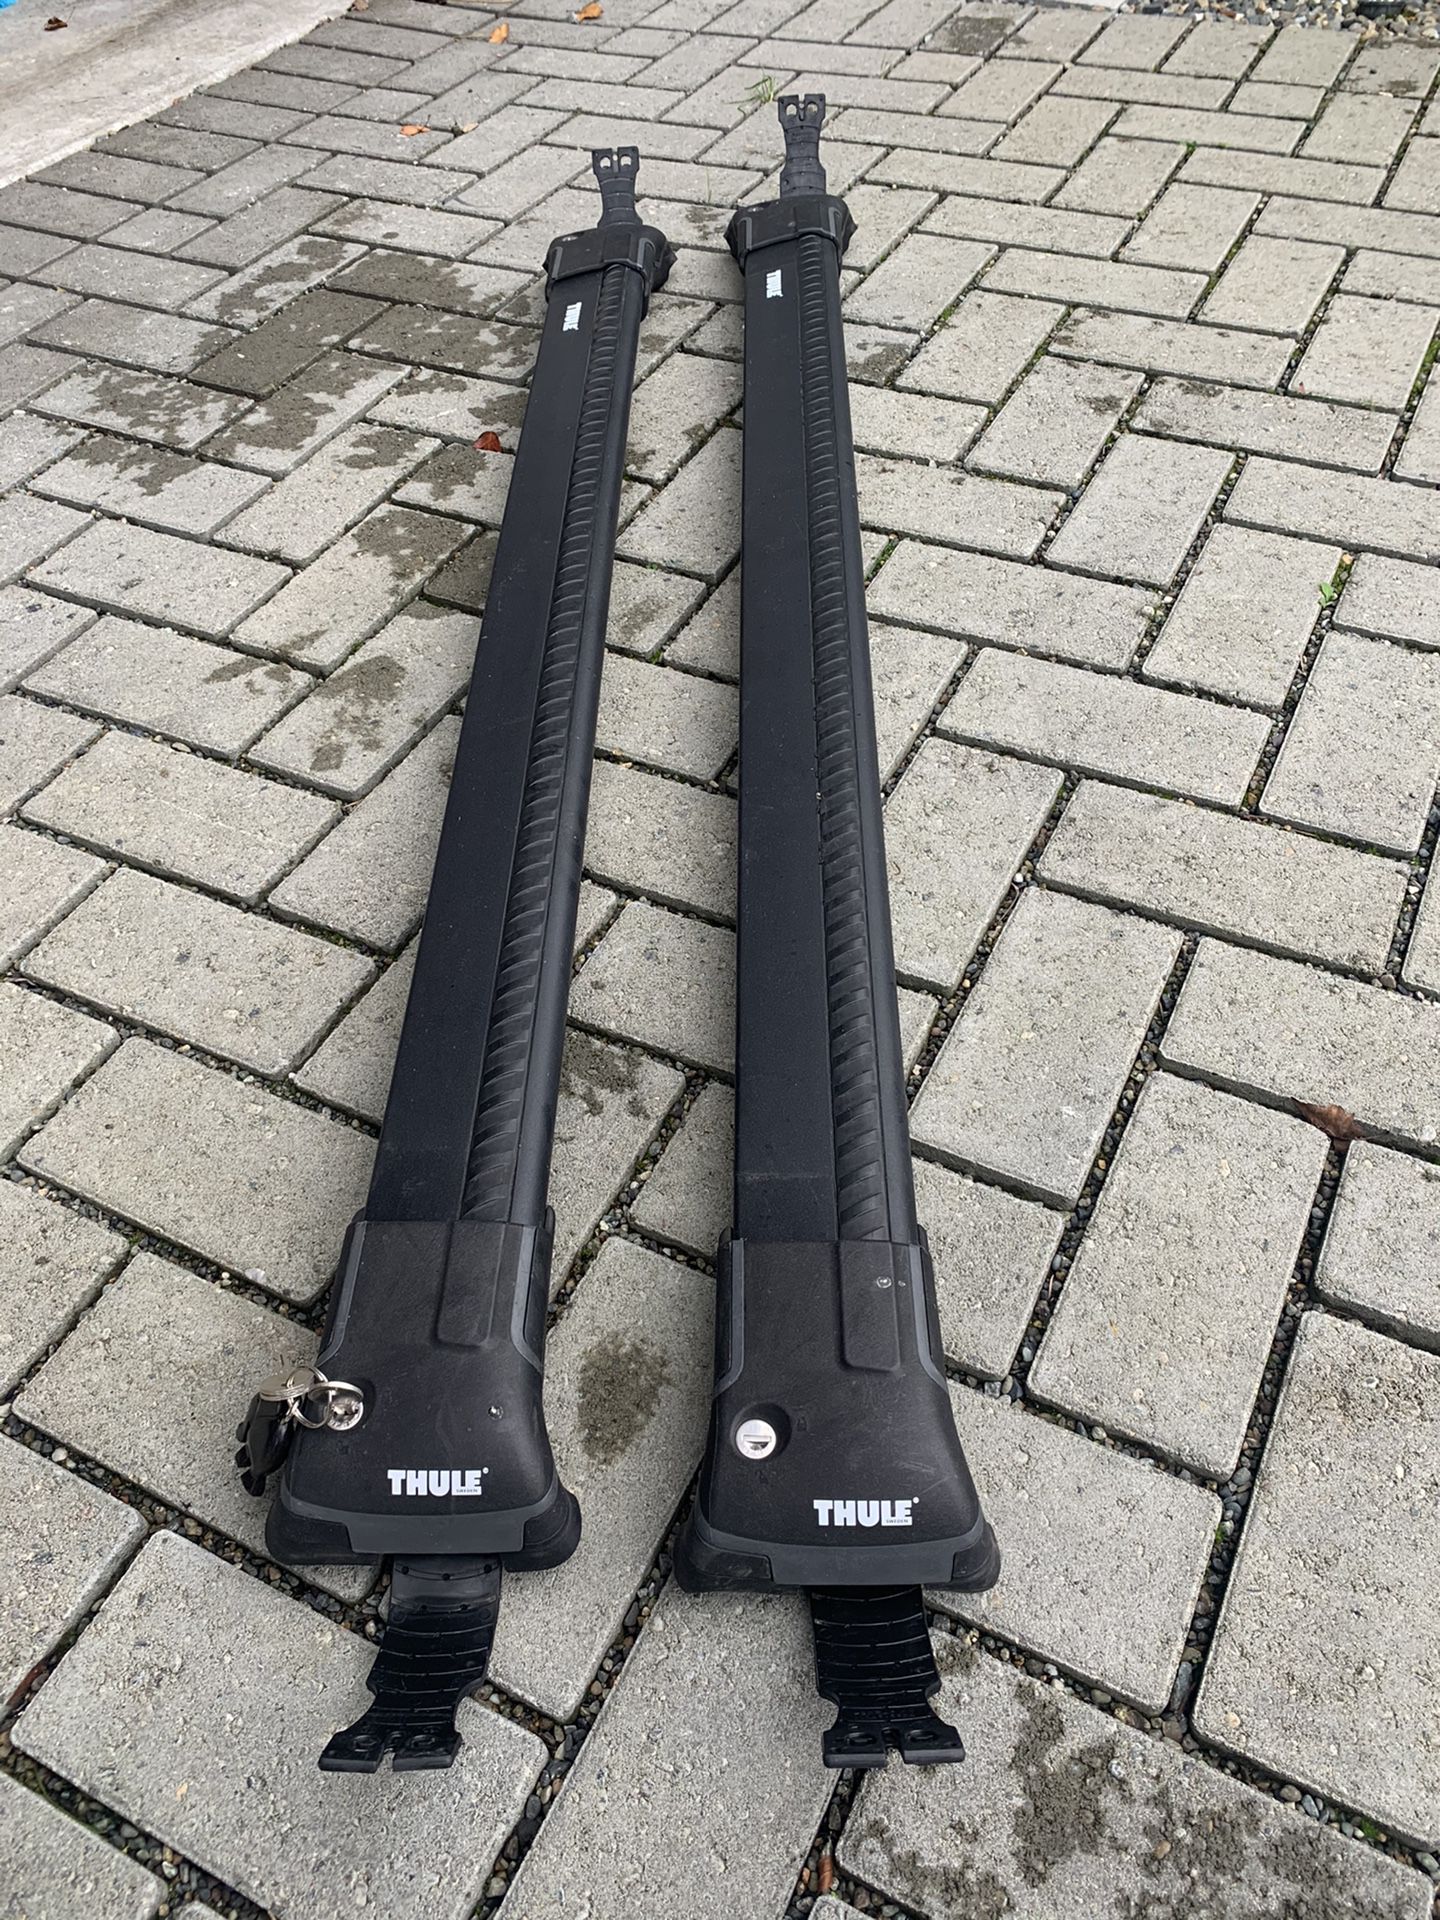 Thule Aeroblade Edge 7503 Roof Rack System - 2 Rails - In GREAT Shape